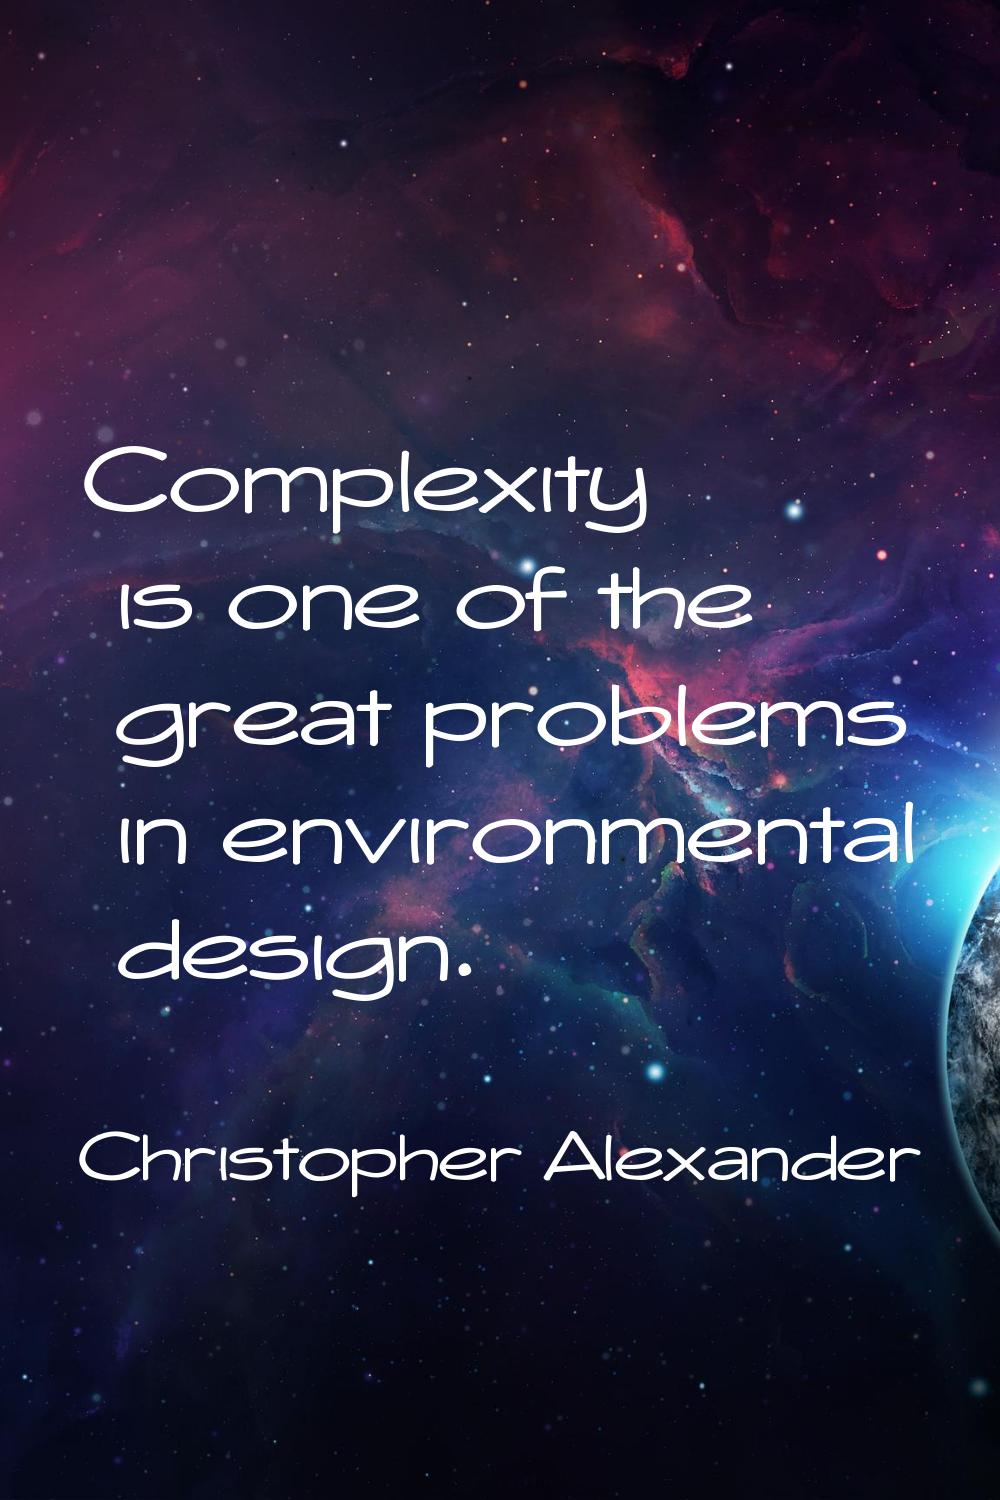 Complexity is one of the great problems in environmental design.